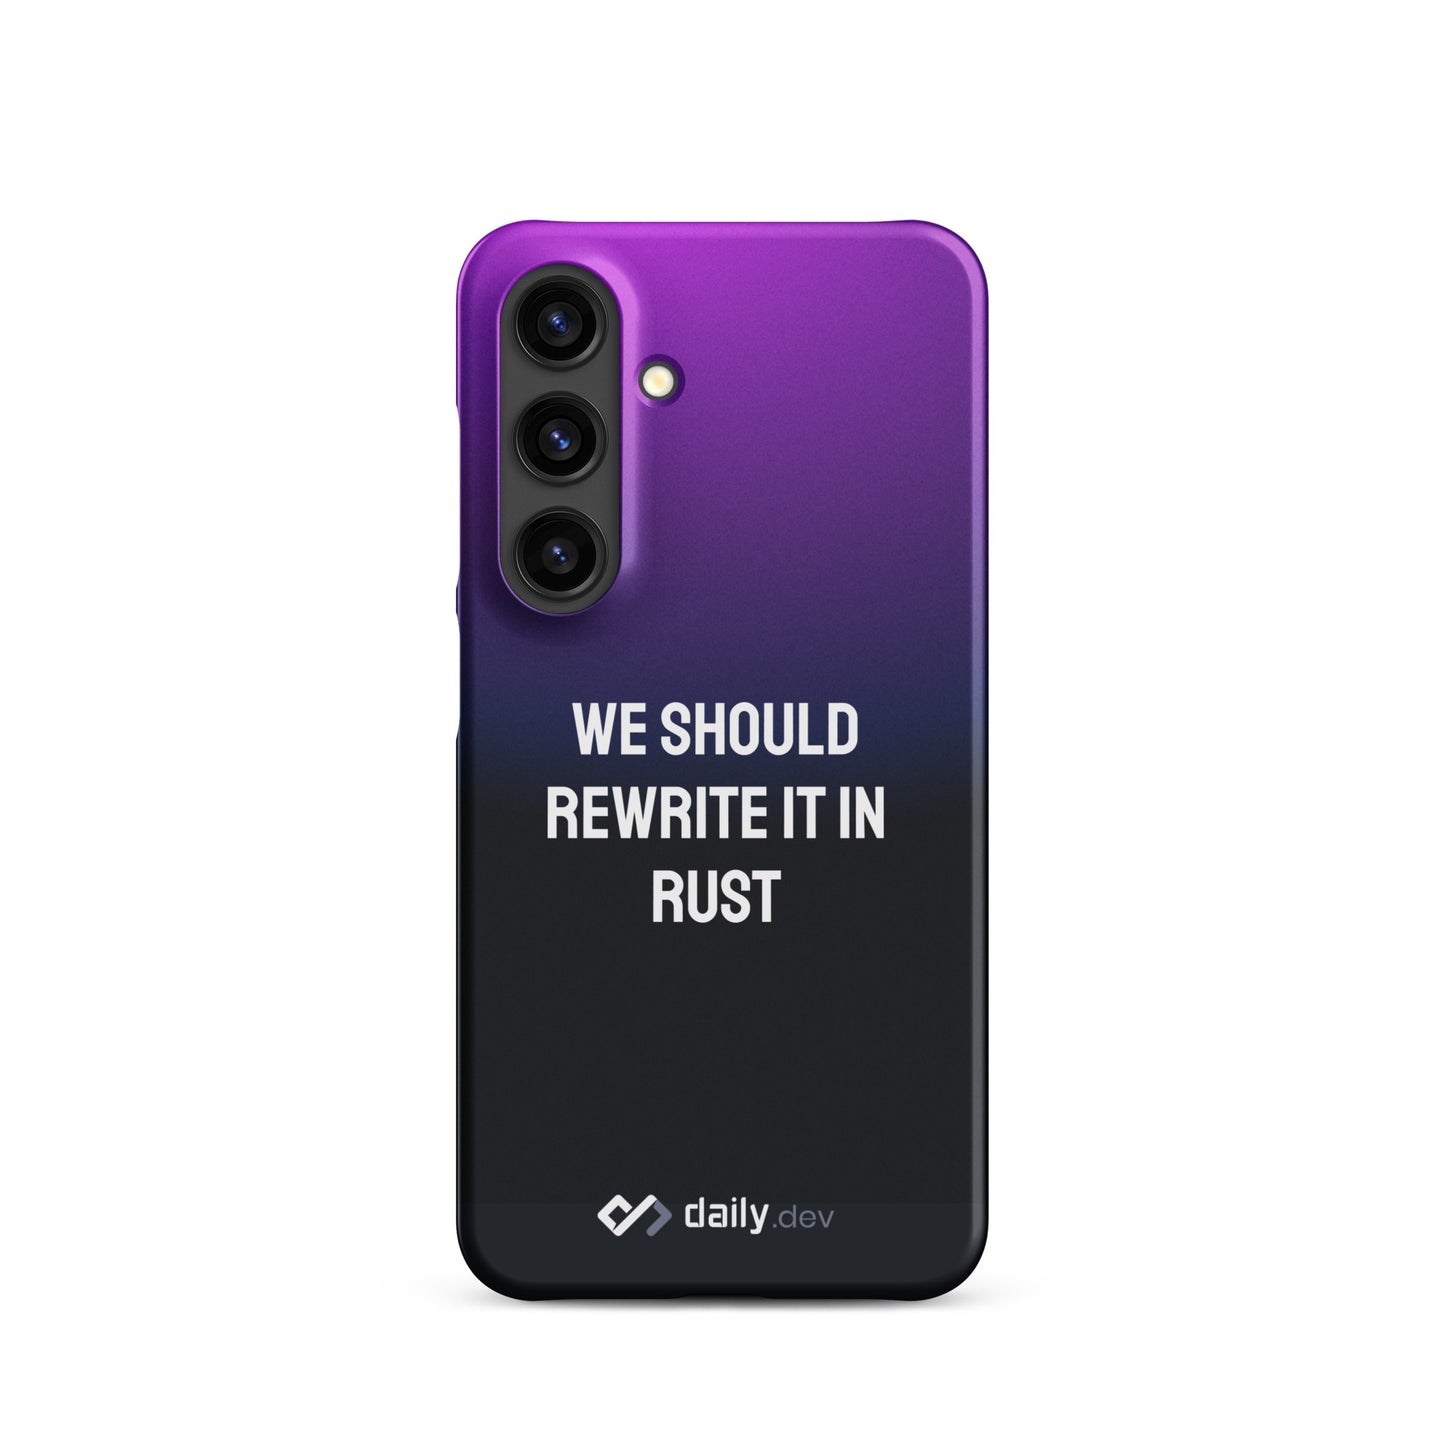 daily.dev Snap case for Samsung® - We should rewrite it in rust